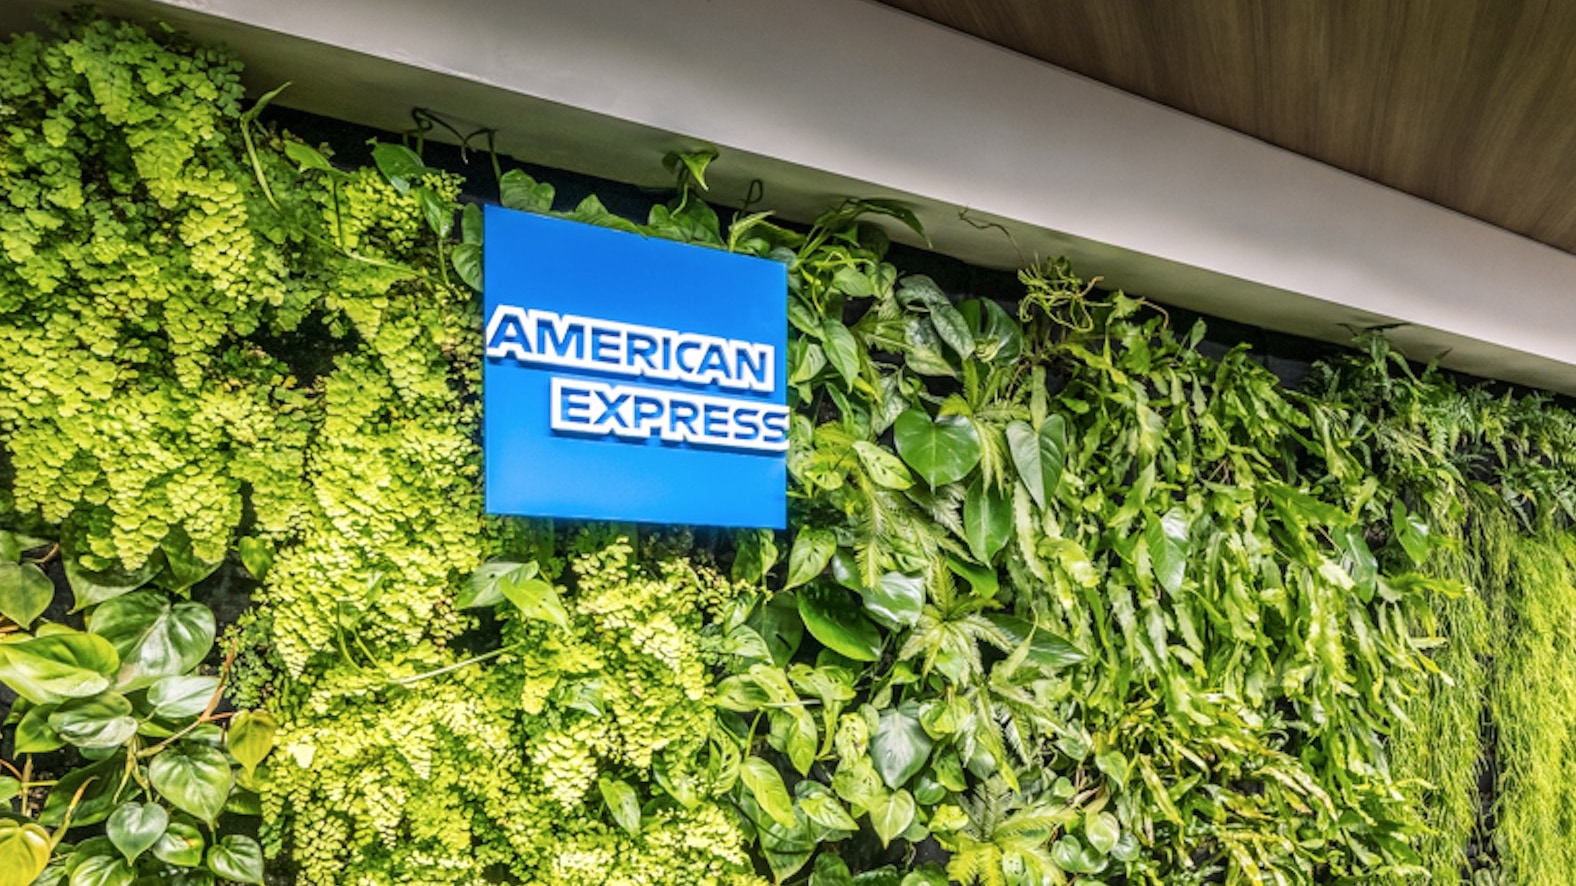 The definitive guide to the American Express lounge network